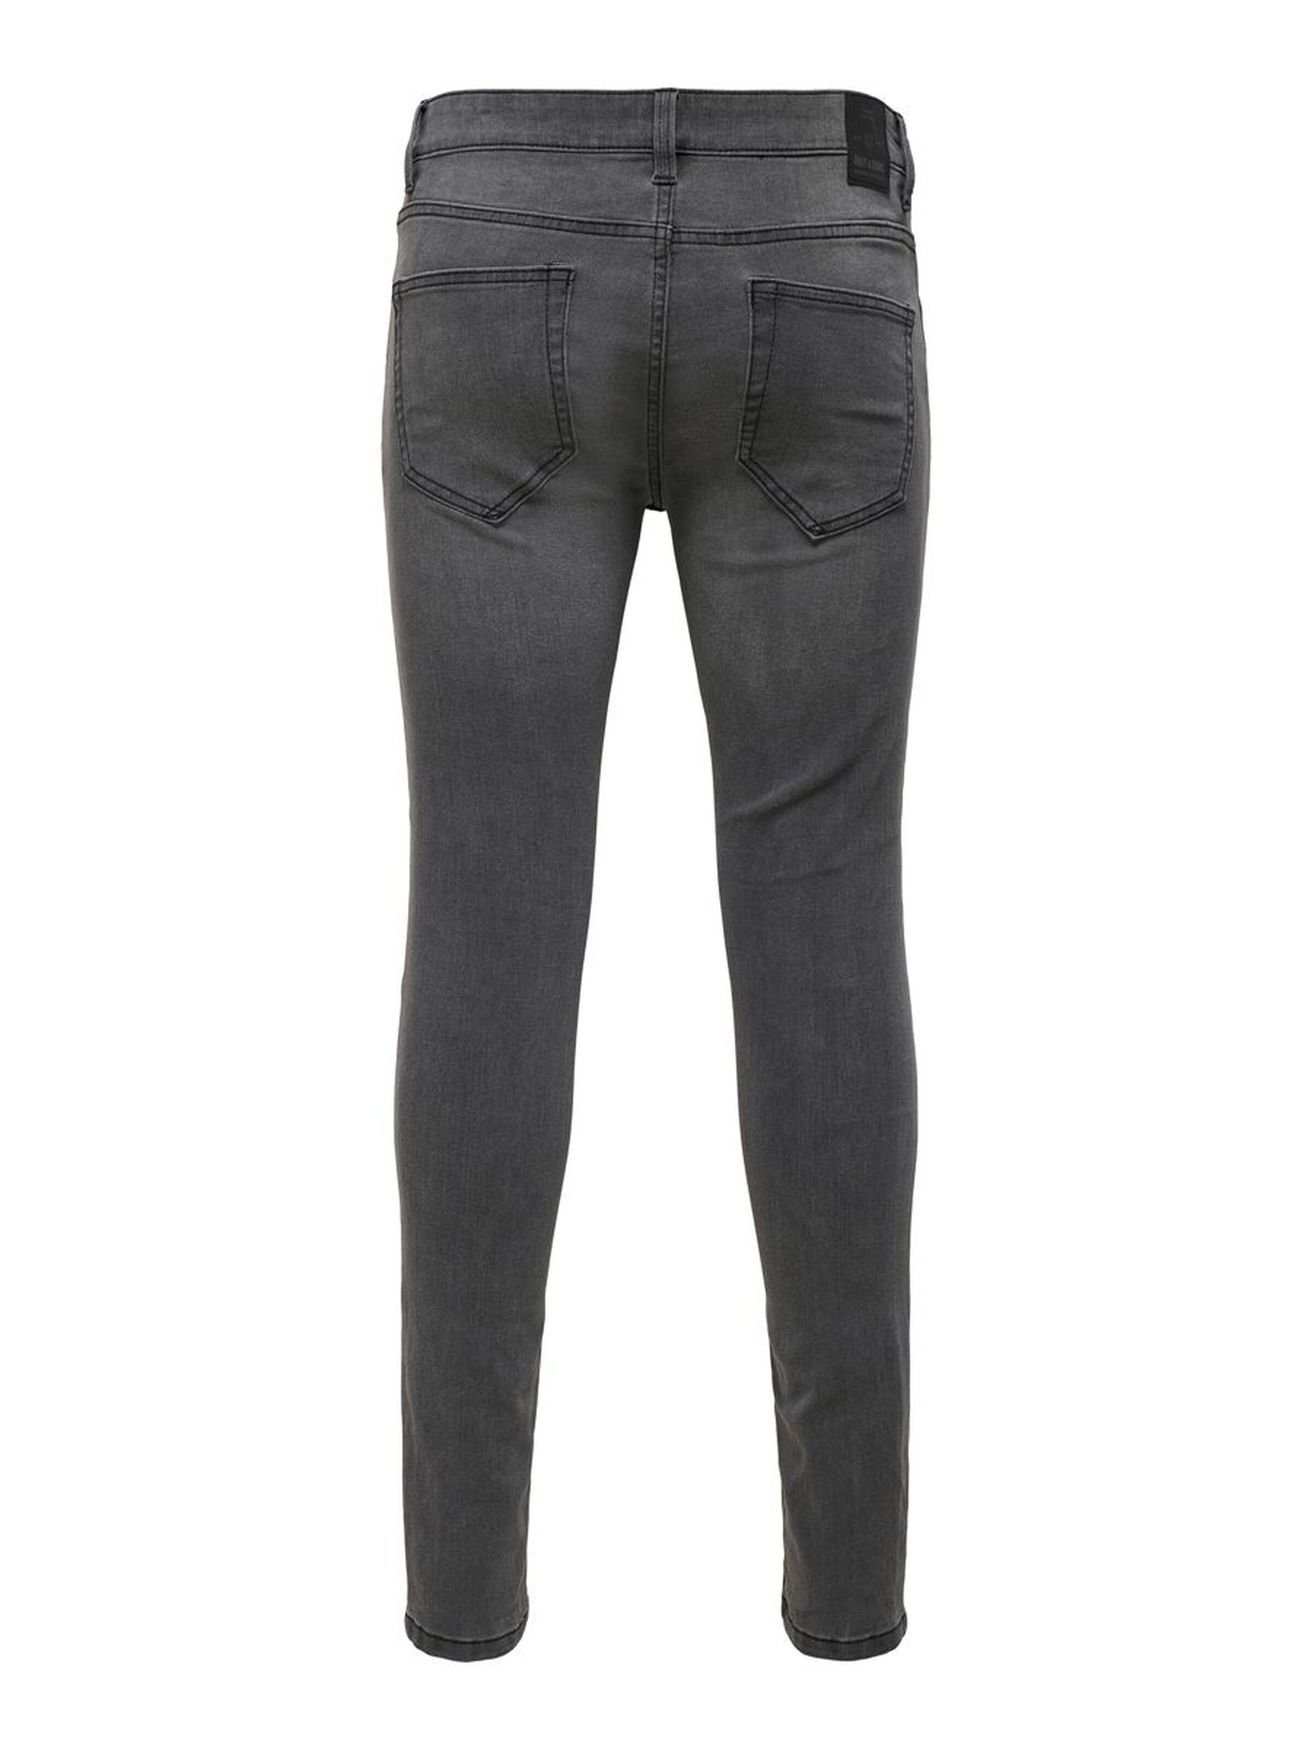 (1-tlg) ONSWARP Denim 3964 Slim-fit-Jeans & Trousers Skinny Hose in Jeans Grau Pants Fit SONS ONLY Stretch Tapered